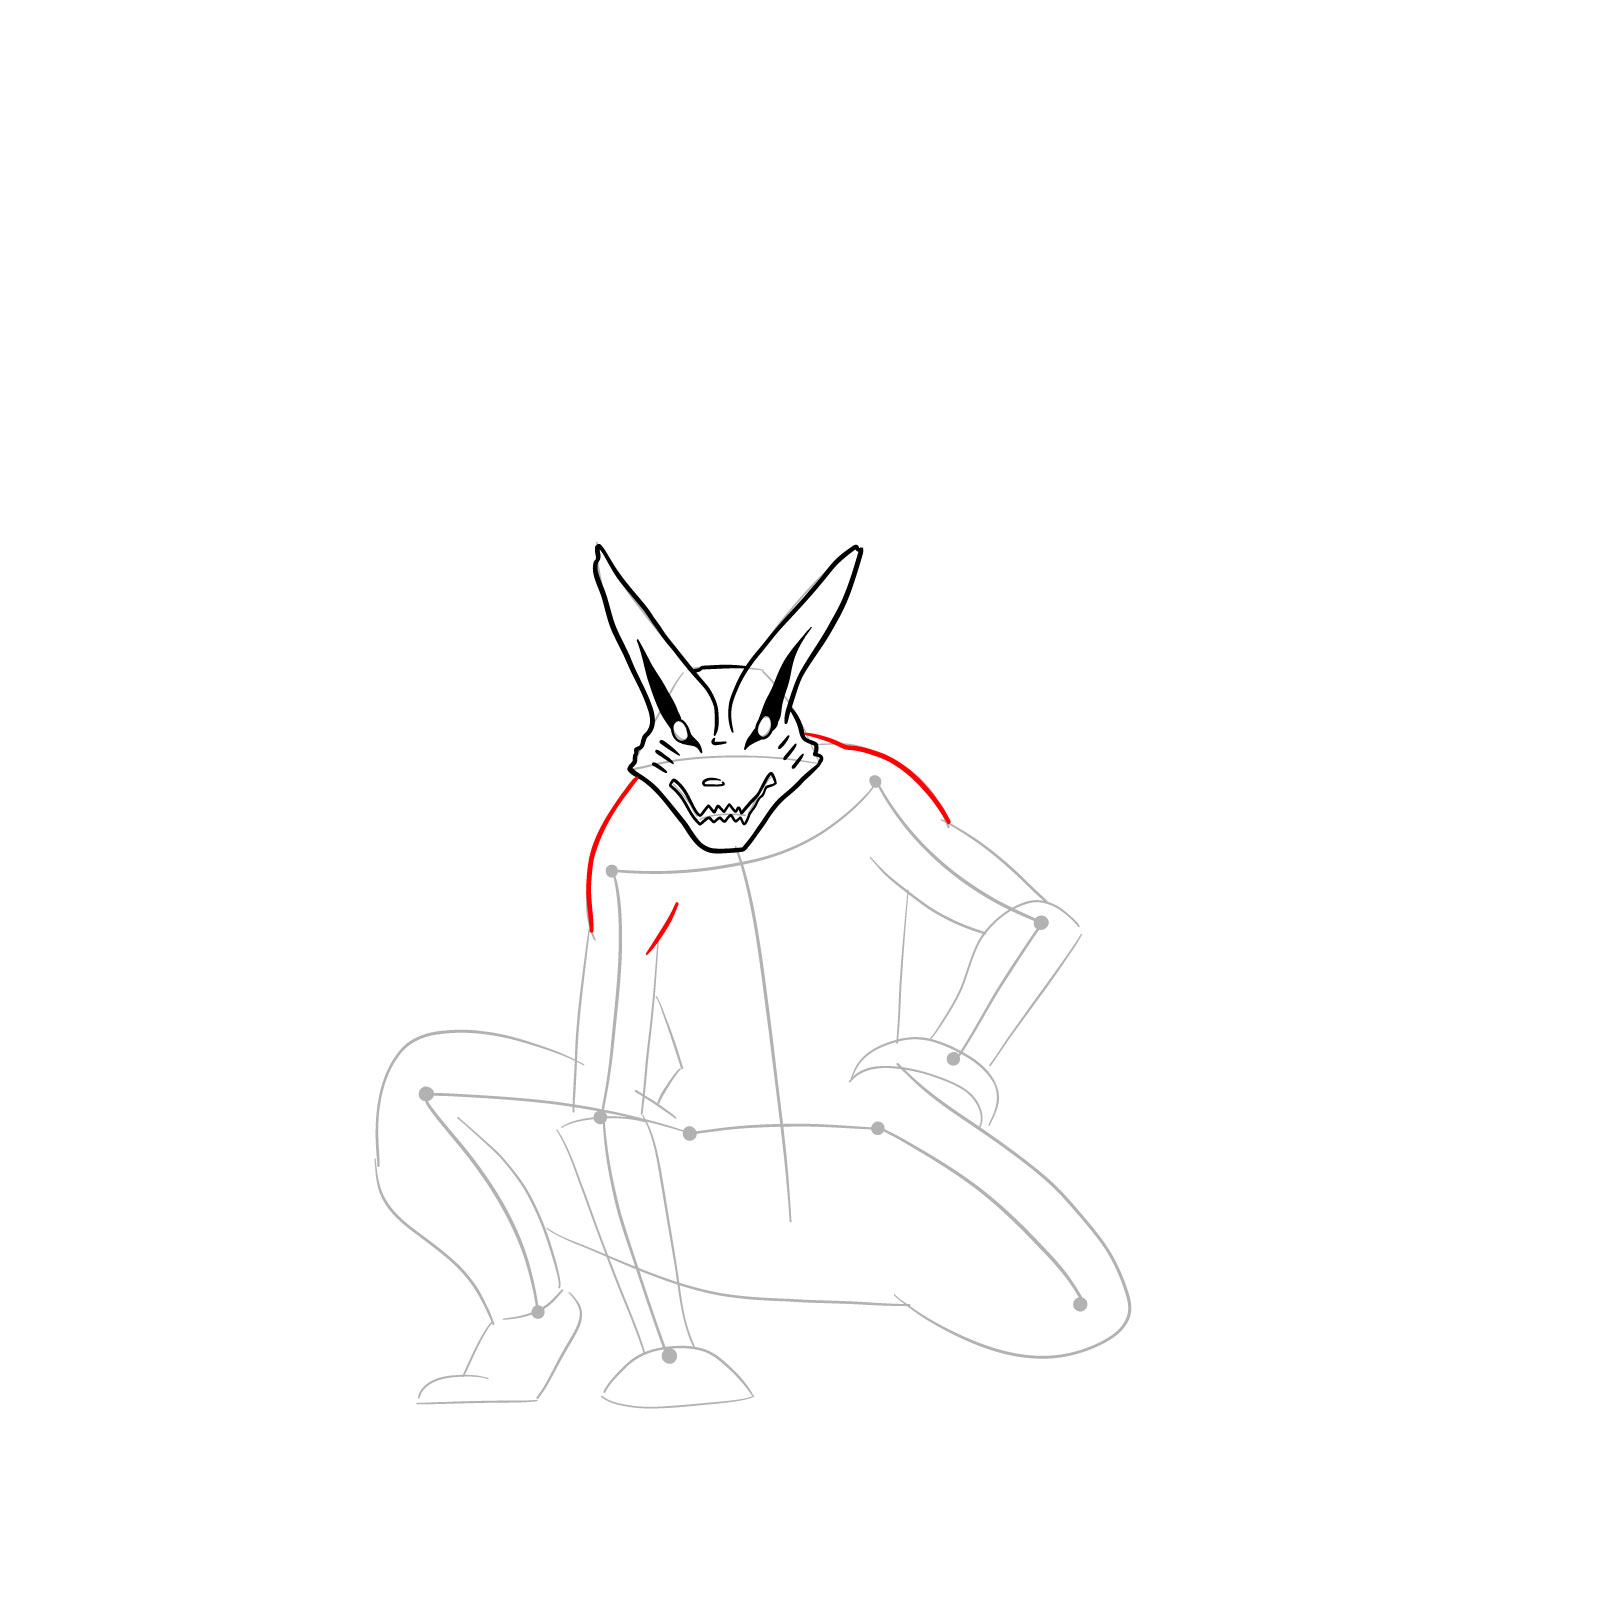 How to Draw Naruto's Tailed Beast Mode - step 11